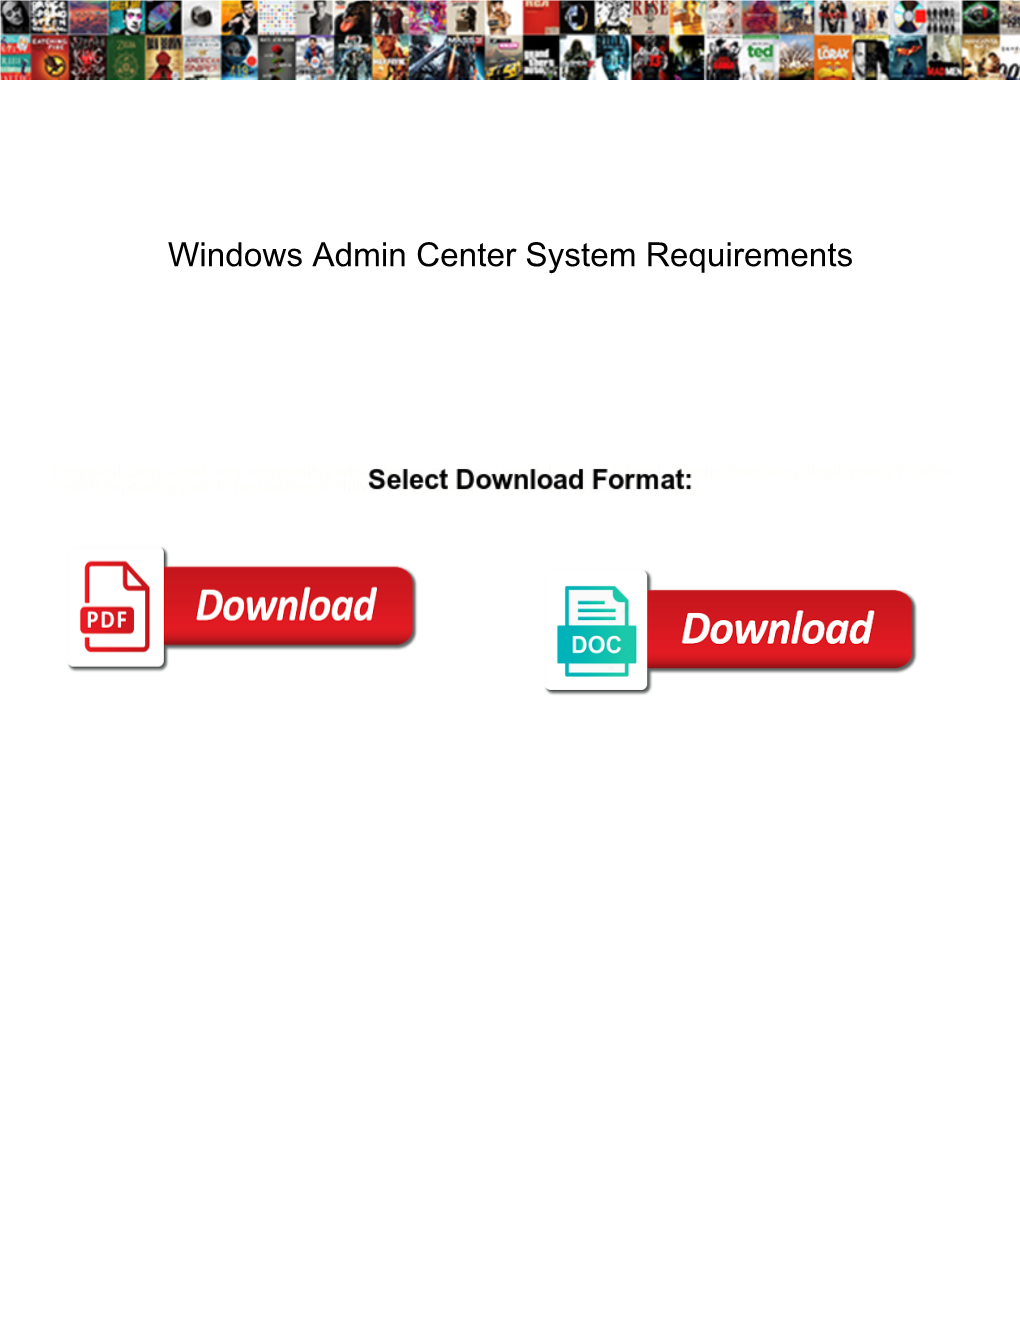 Windows Admin Center System Requirements